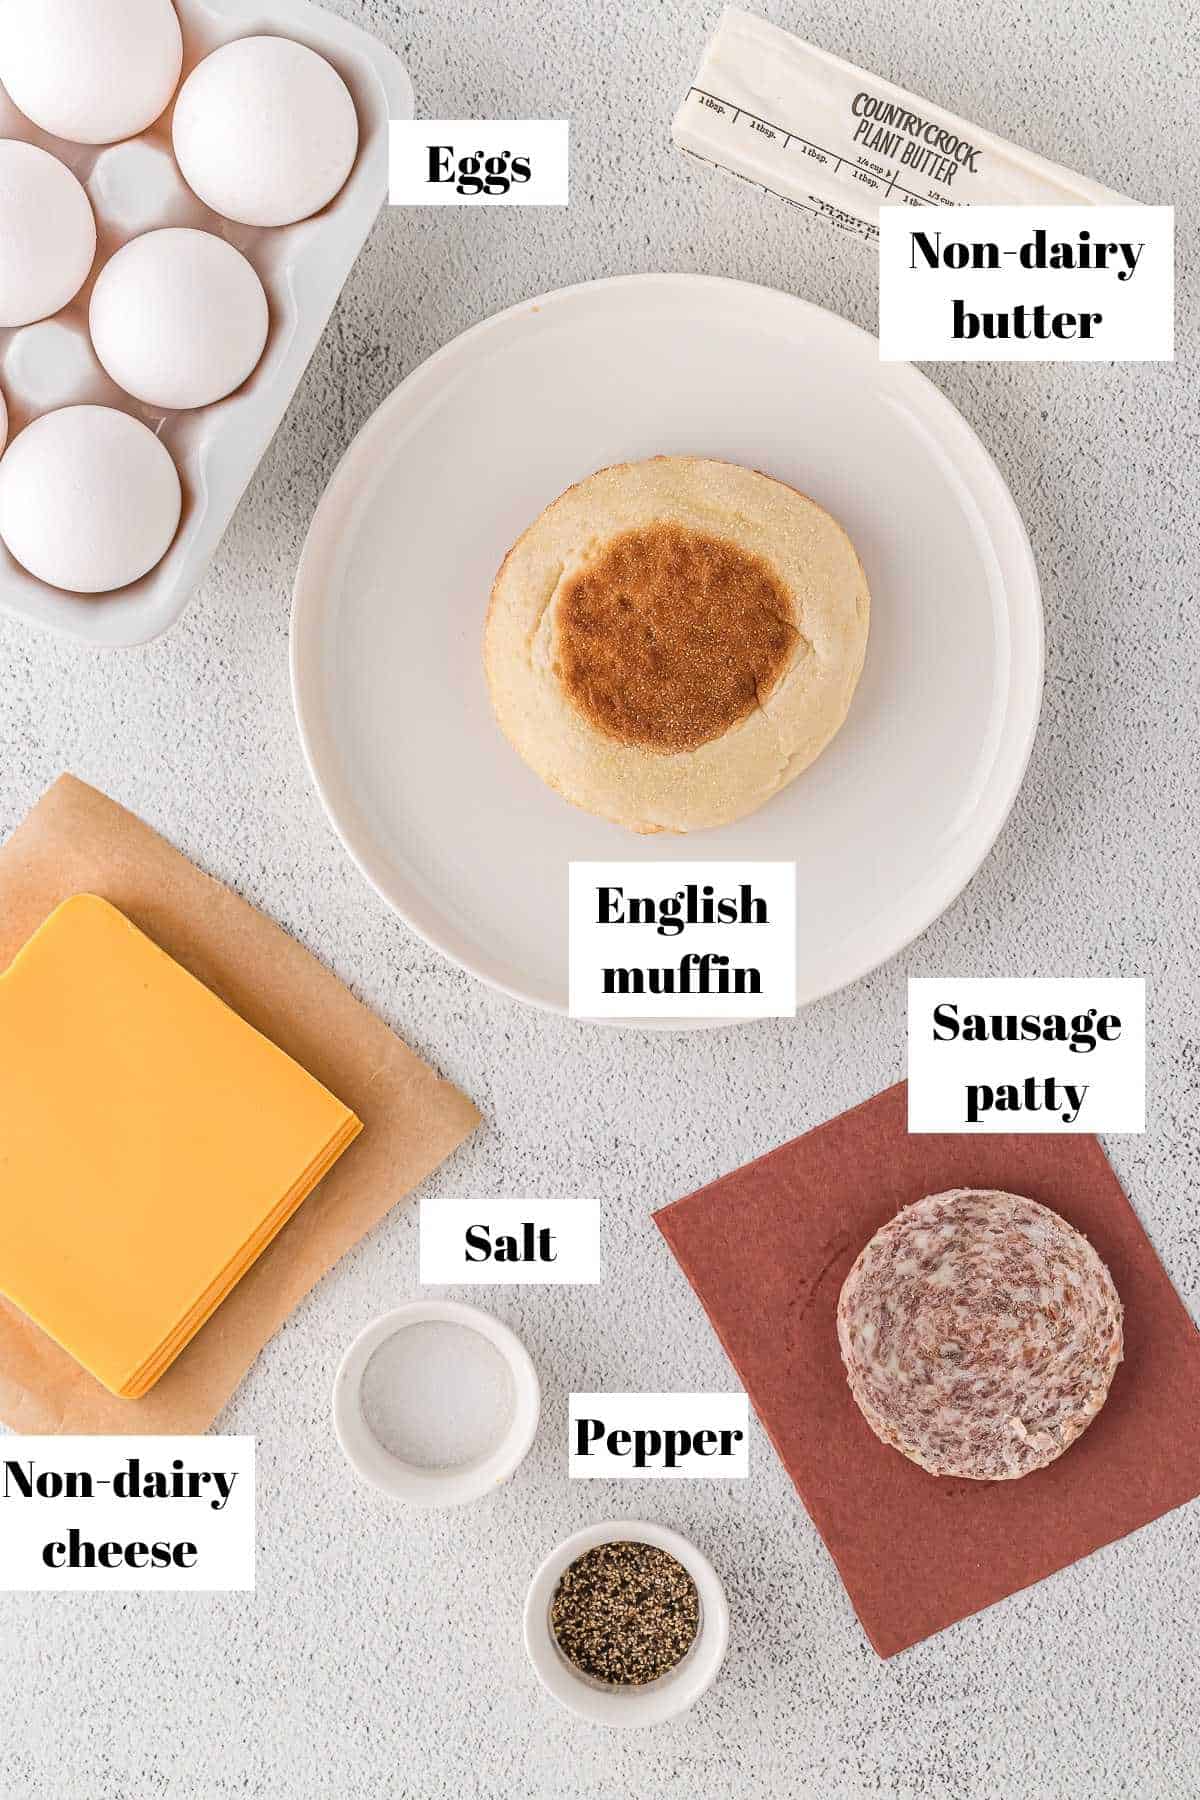 Ingredients to make a sausage breakfast sandwich. Text on image for labeling ingredients.